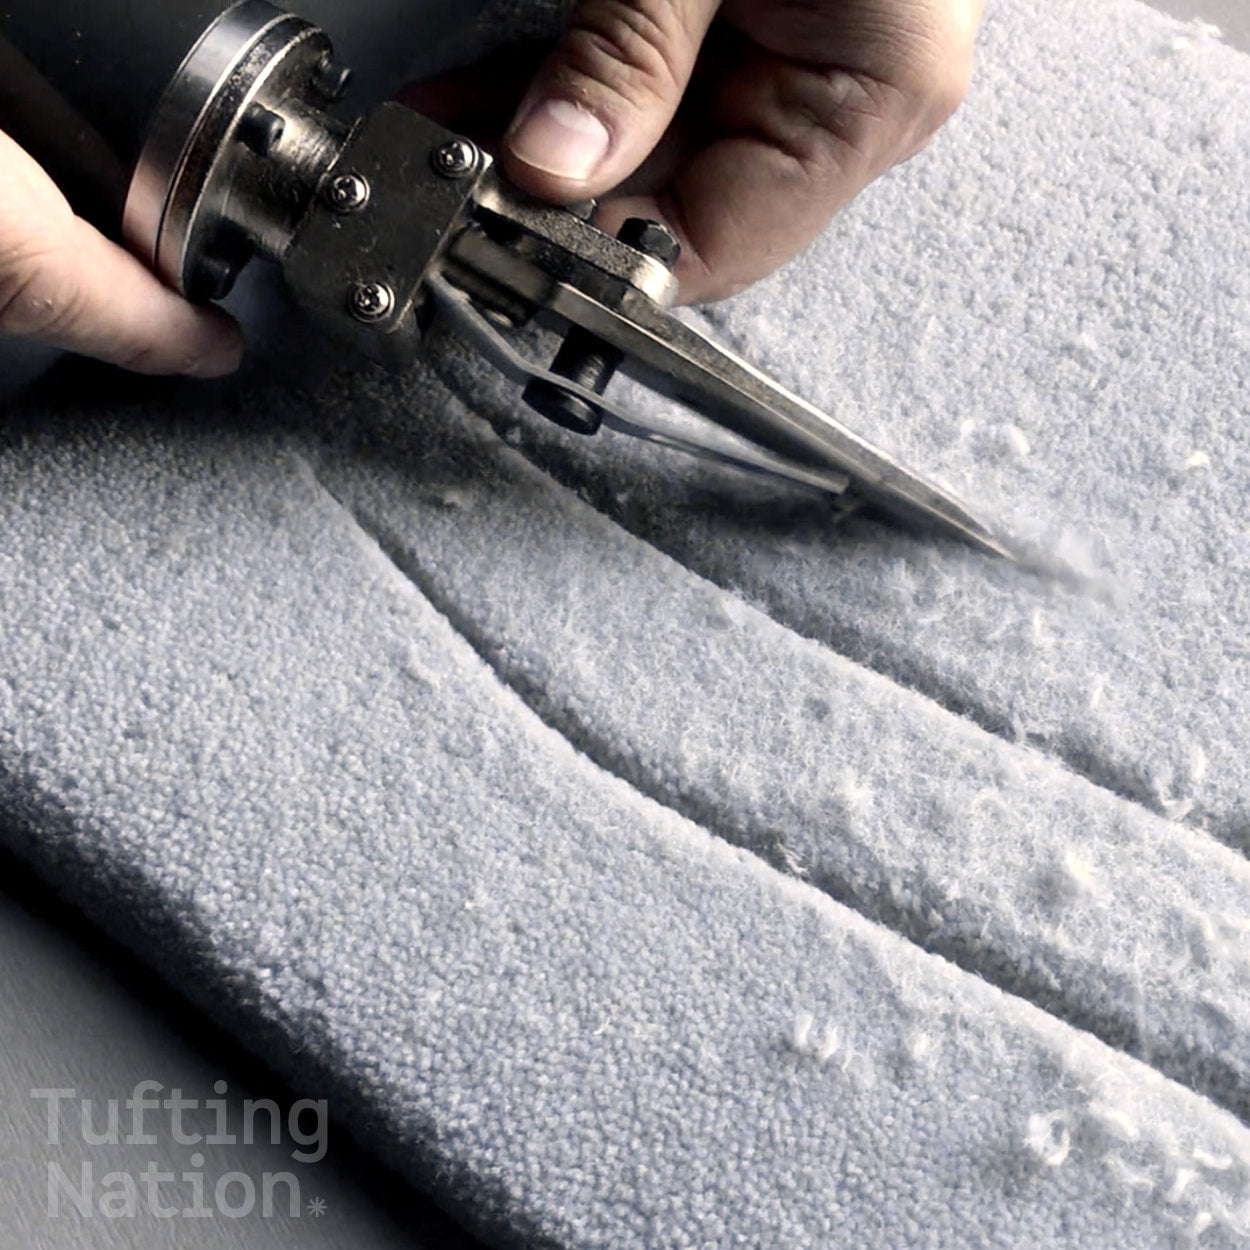 Rug Carving Scissors in use over a gray tufted rug | TuftingNation